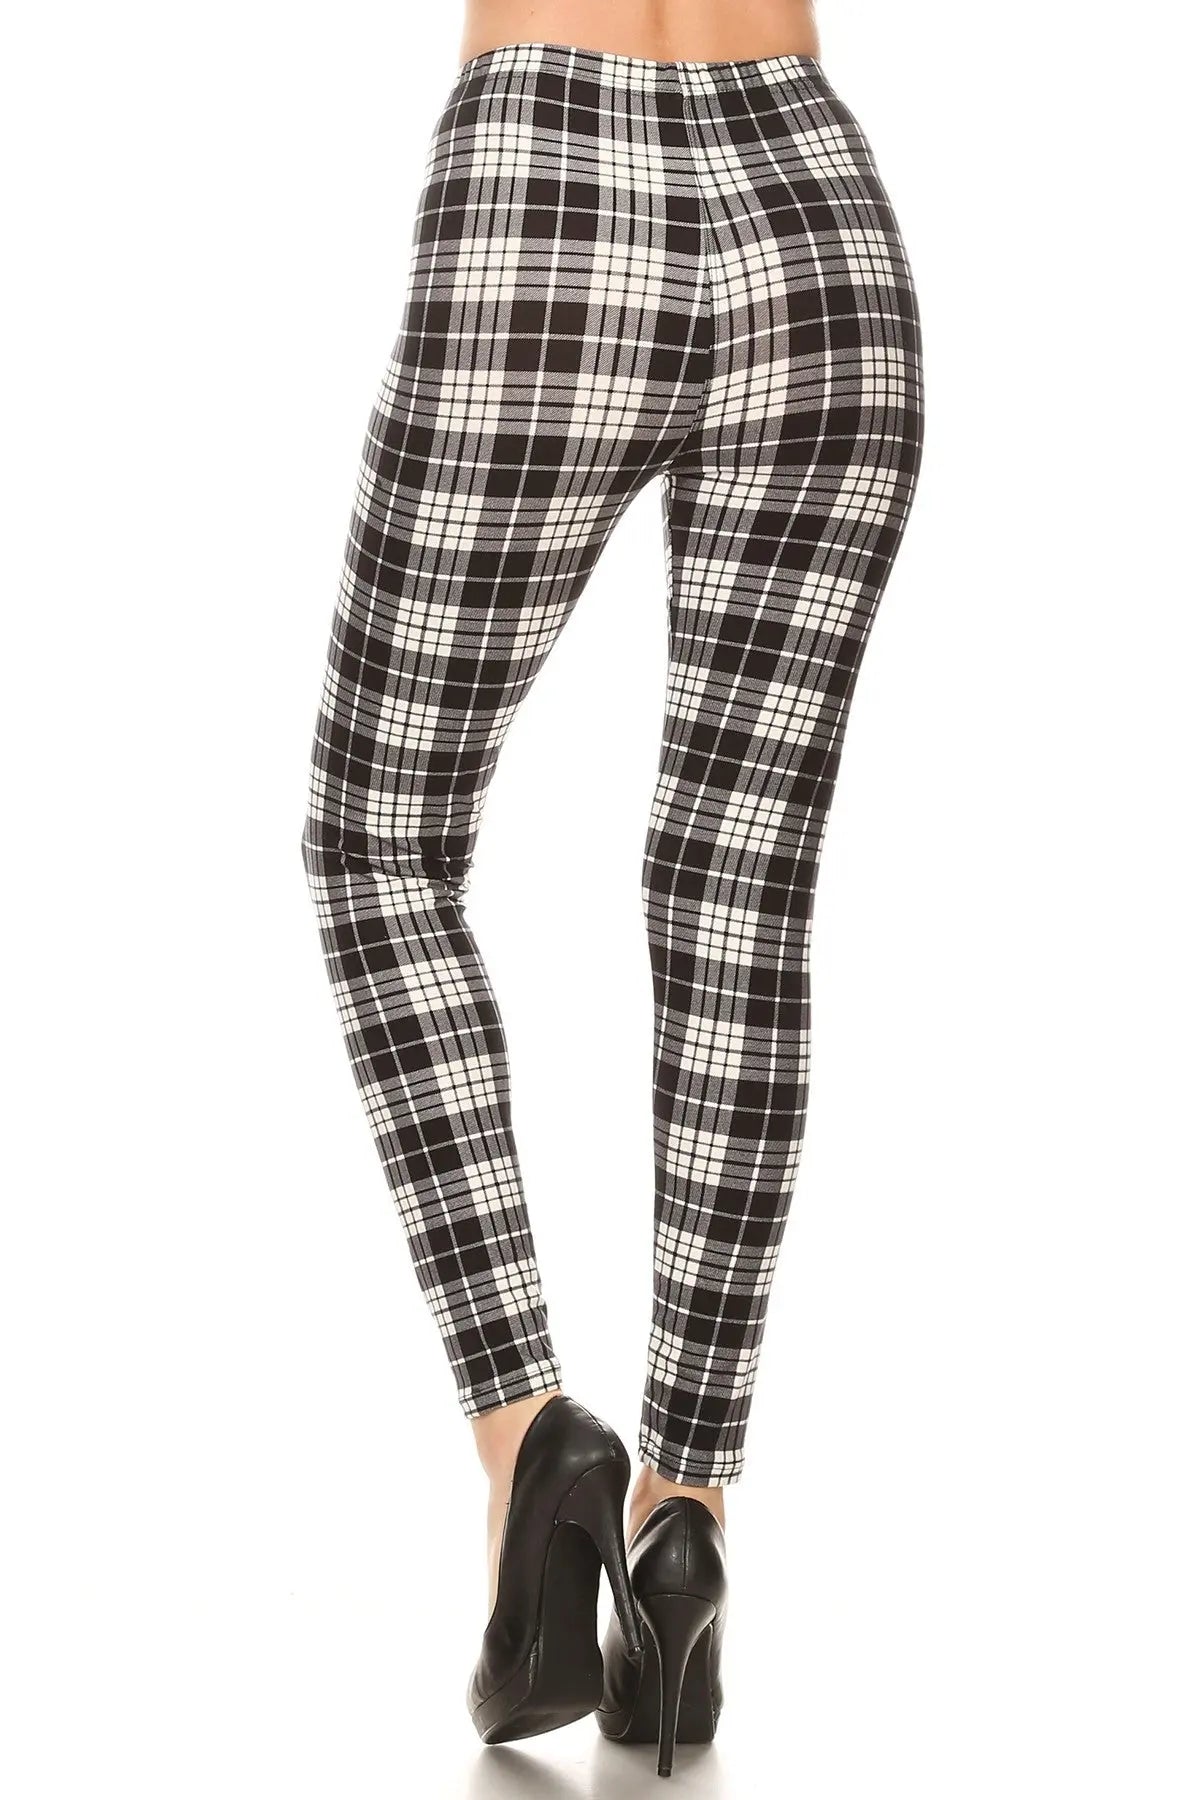 Plaid High Waisted Leggings In A Fitted Style, With An Elastic Waistband Sunny EvE Fashion